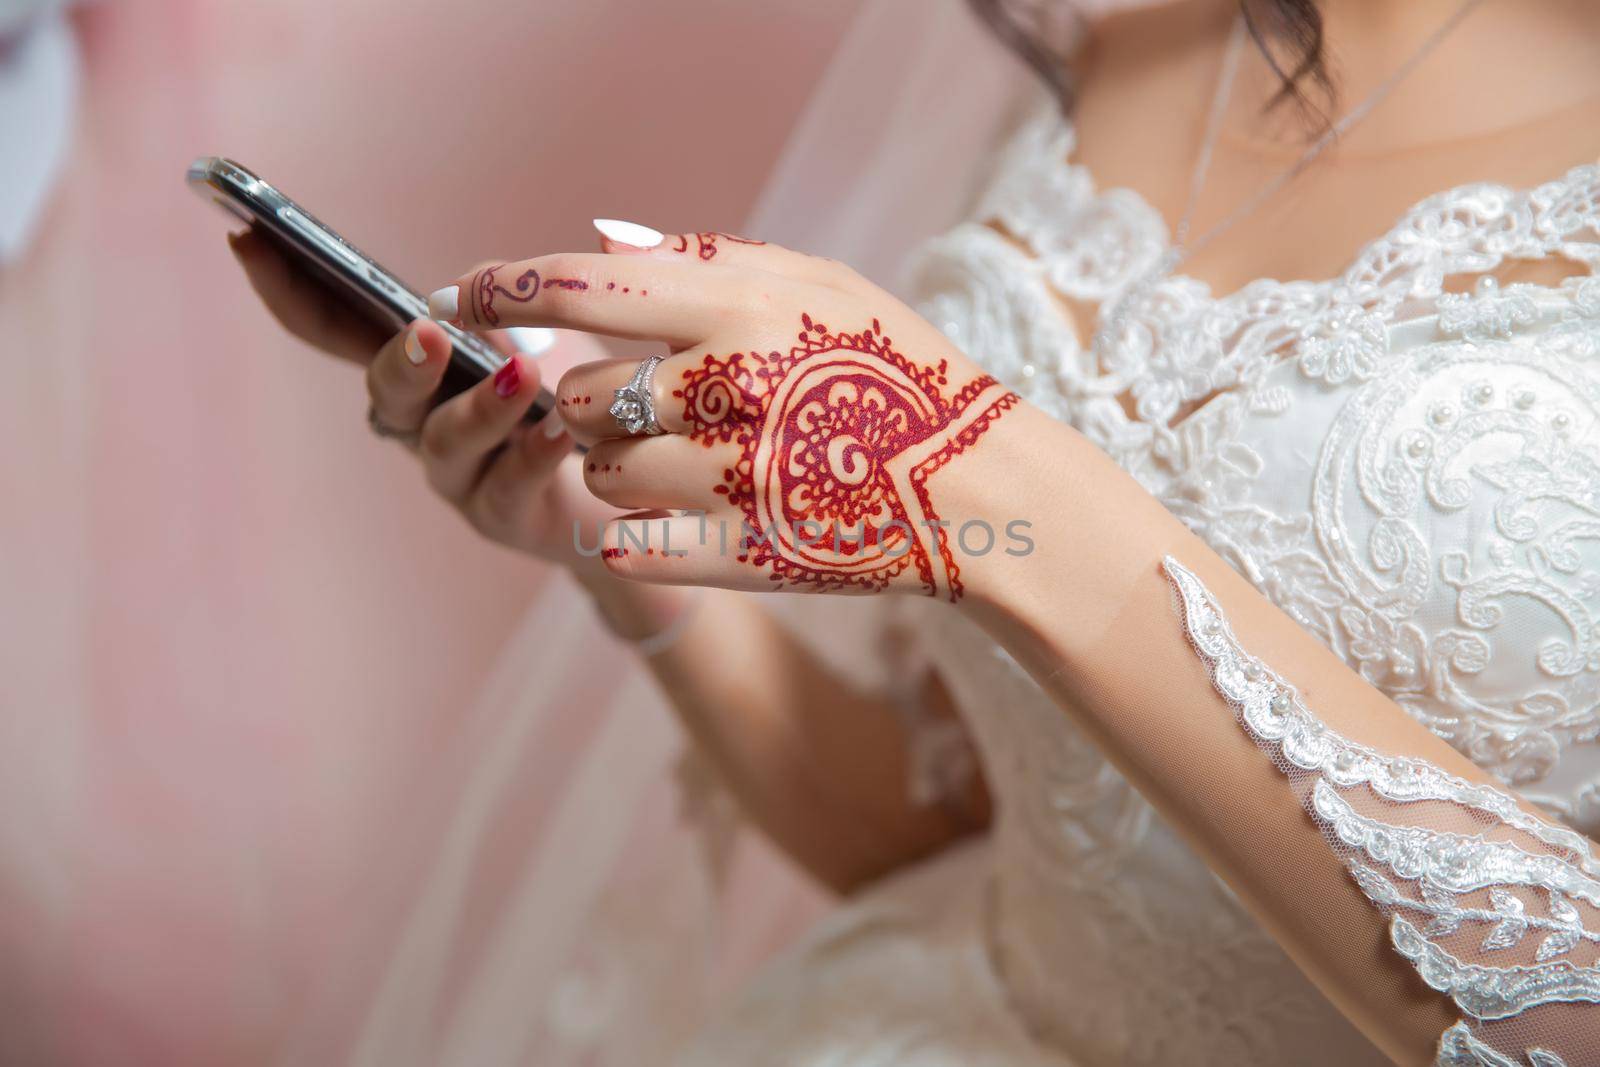 The bride holds a phone . The bride has a ring in her hands . The bride has a henna.